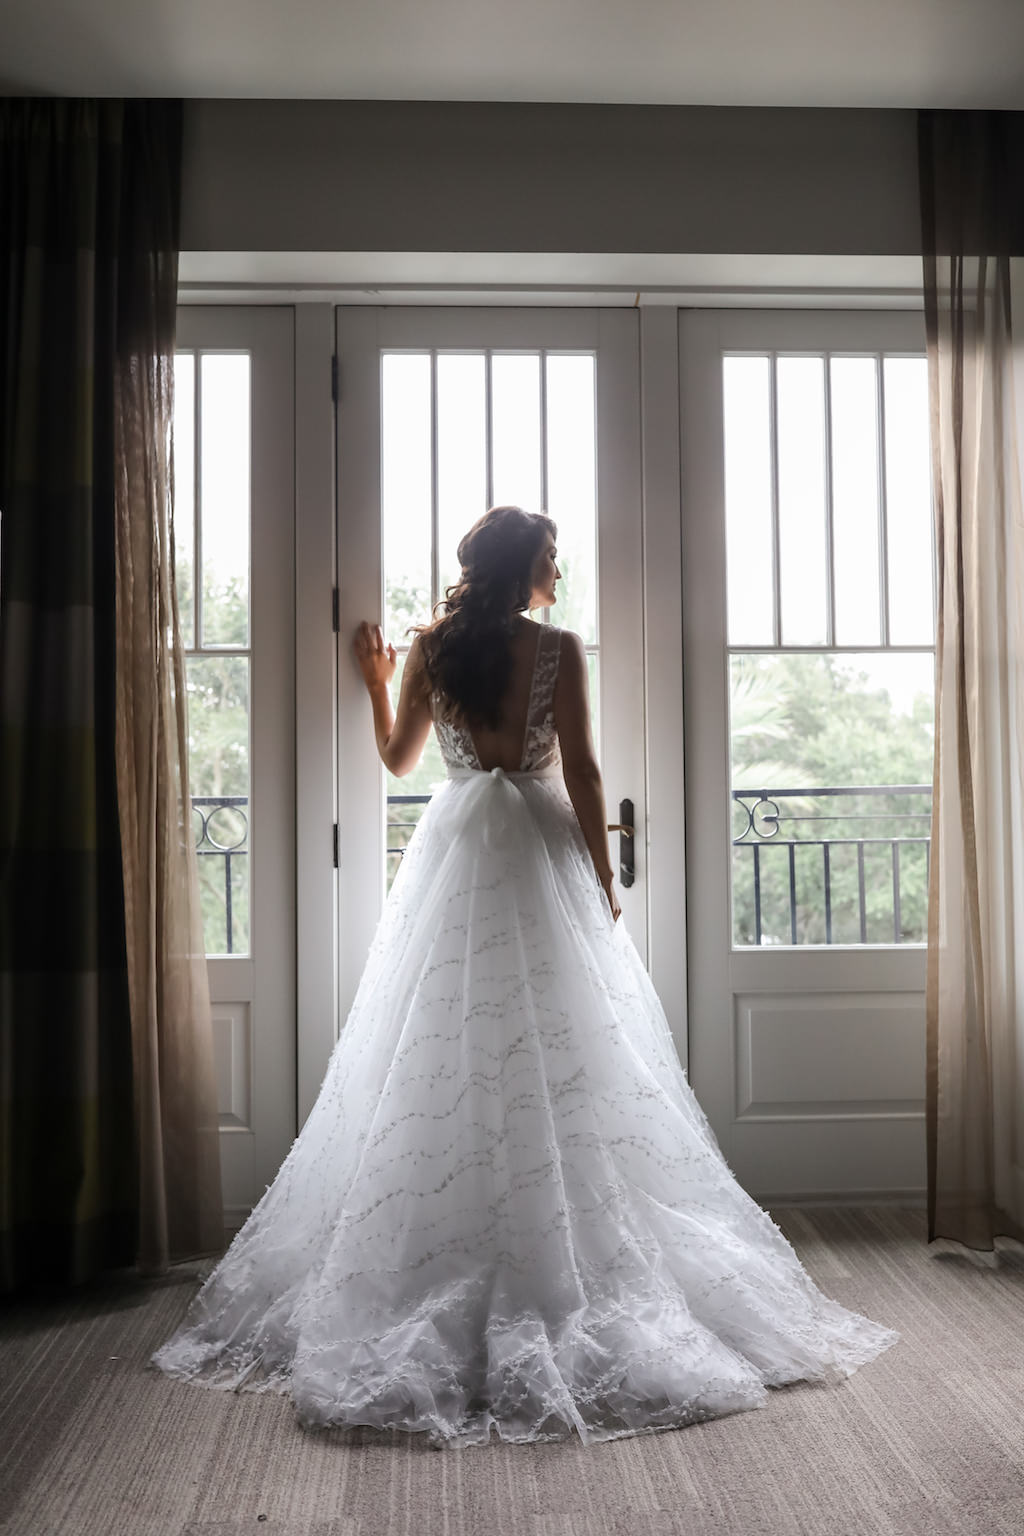 Bride Wedding Portrait in A-Line Illusion Low Back with Tulle Ribbon, Tank Top Straps and Floral Lace Appliques Wedding Dress Bay Photographer Lifelong Photography Studios | Hair and Makeup LDM Beauty Group | Wedding Dress Shop The Bride Tampa